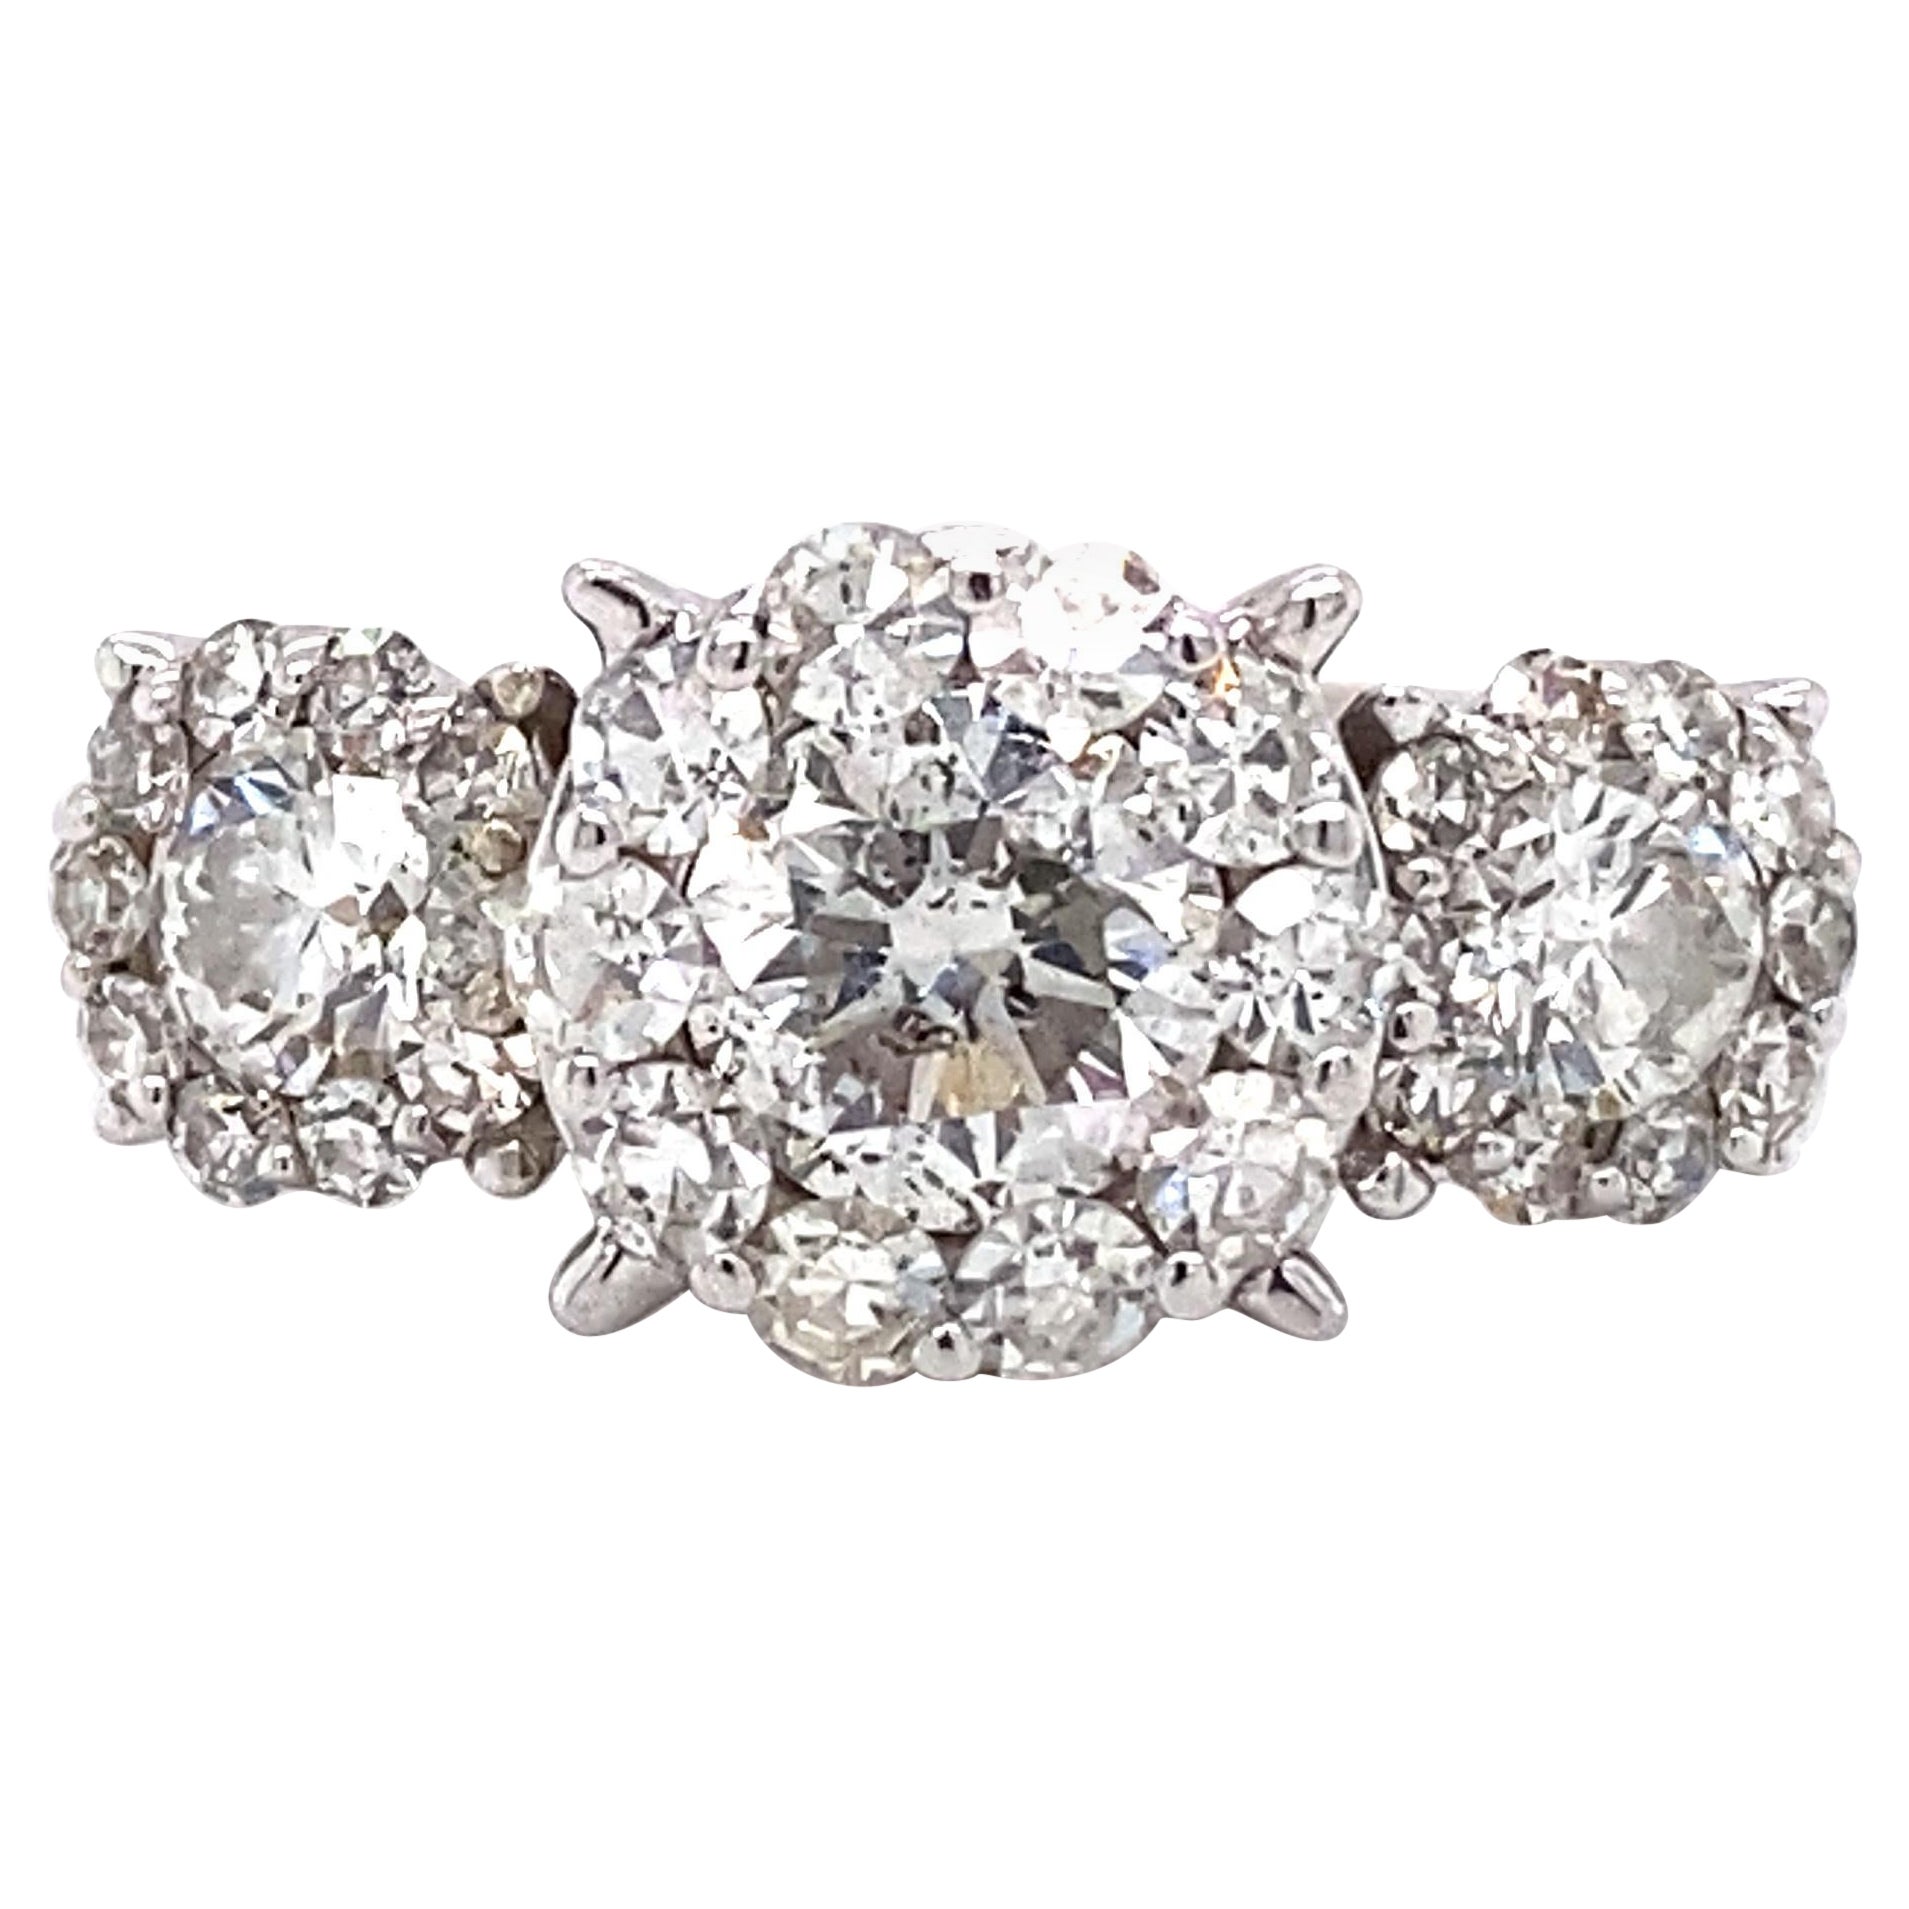 Circa 1990s Three Stone Diamond Cluster Ring in 14K White Gold For Sale